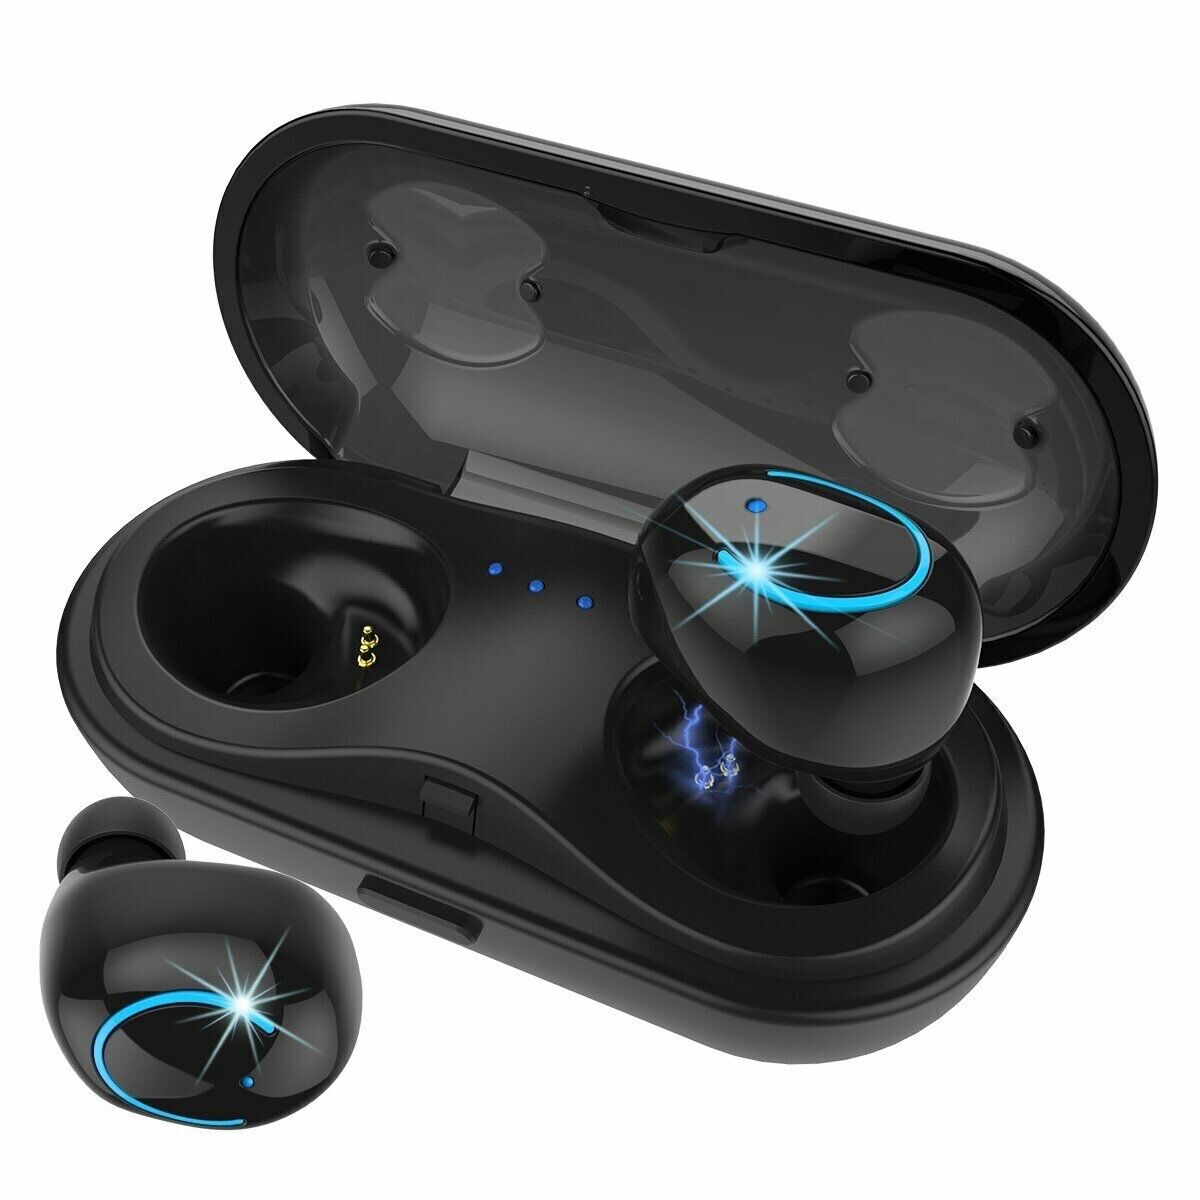 Connecting TWS Wireless Earbuds: A Step-by-Step Guide